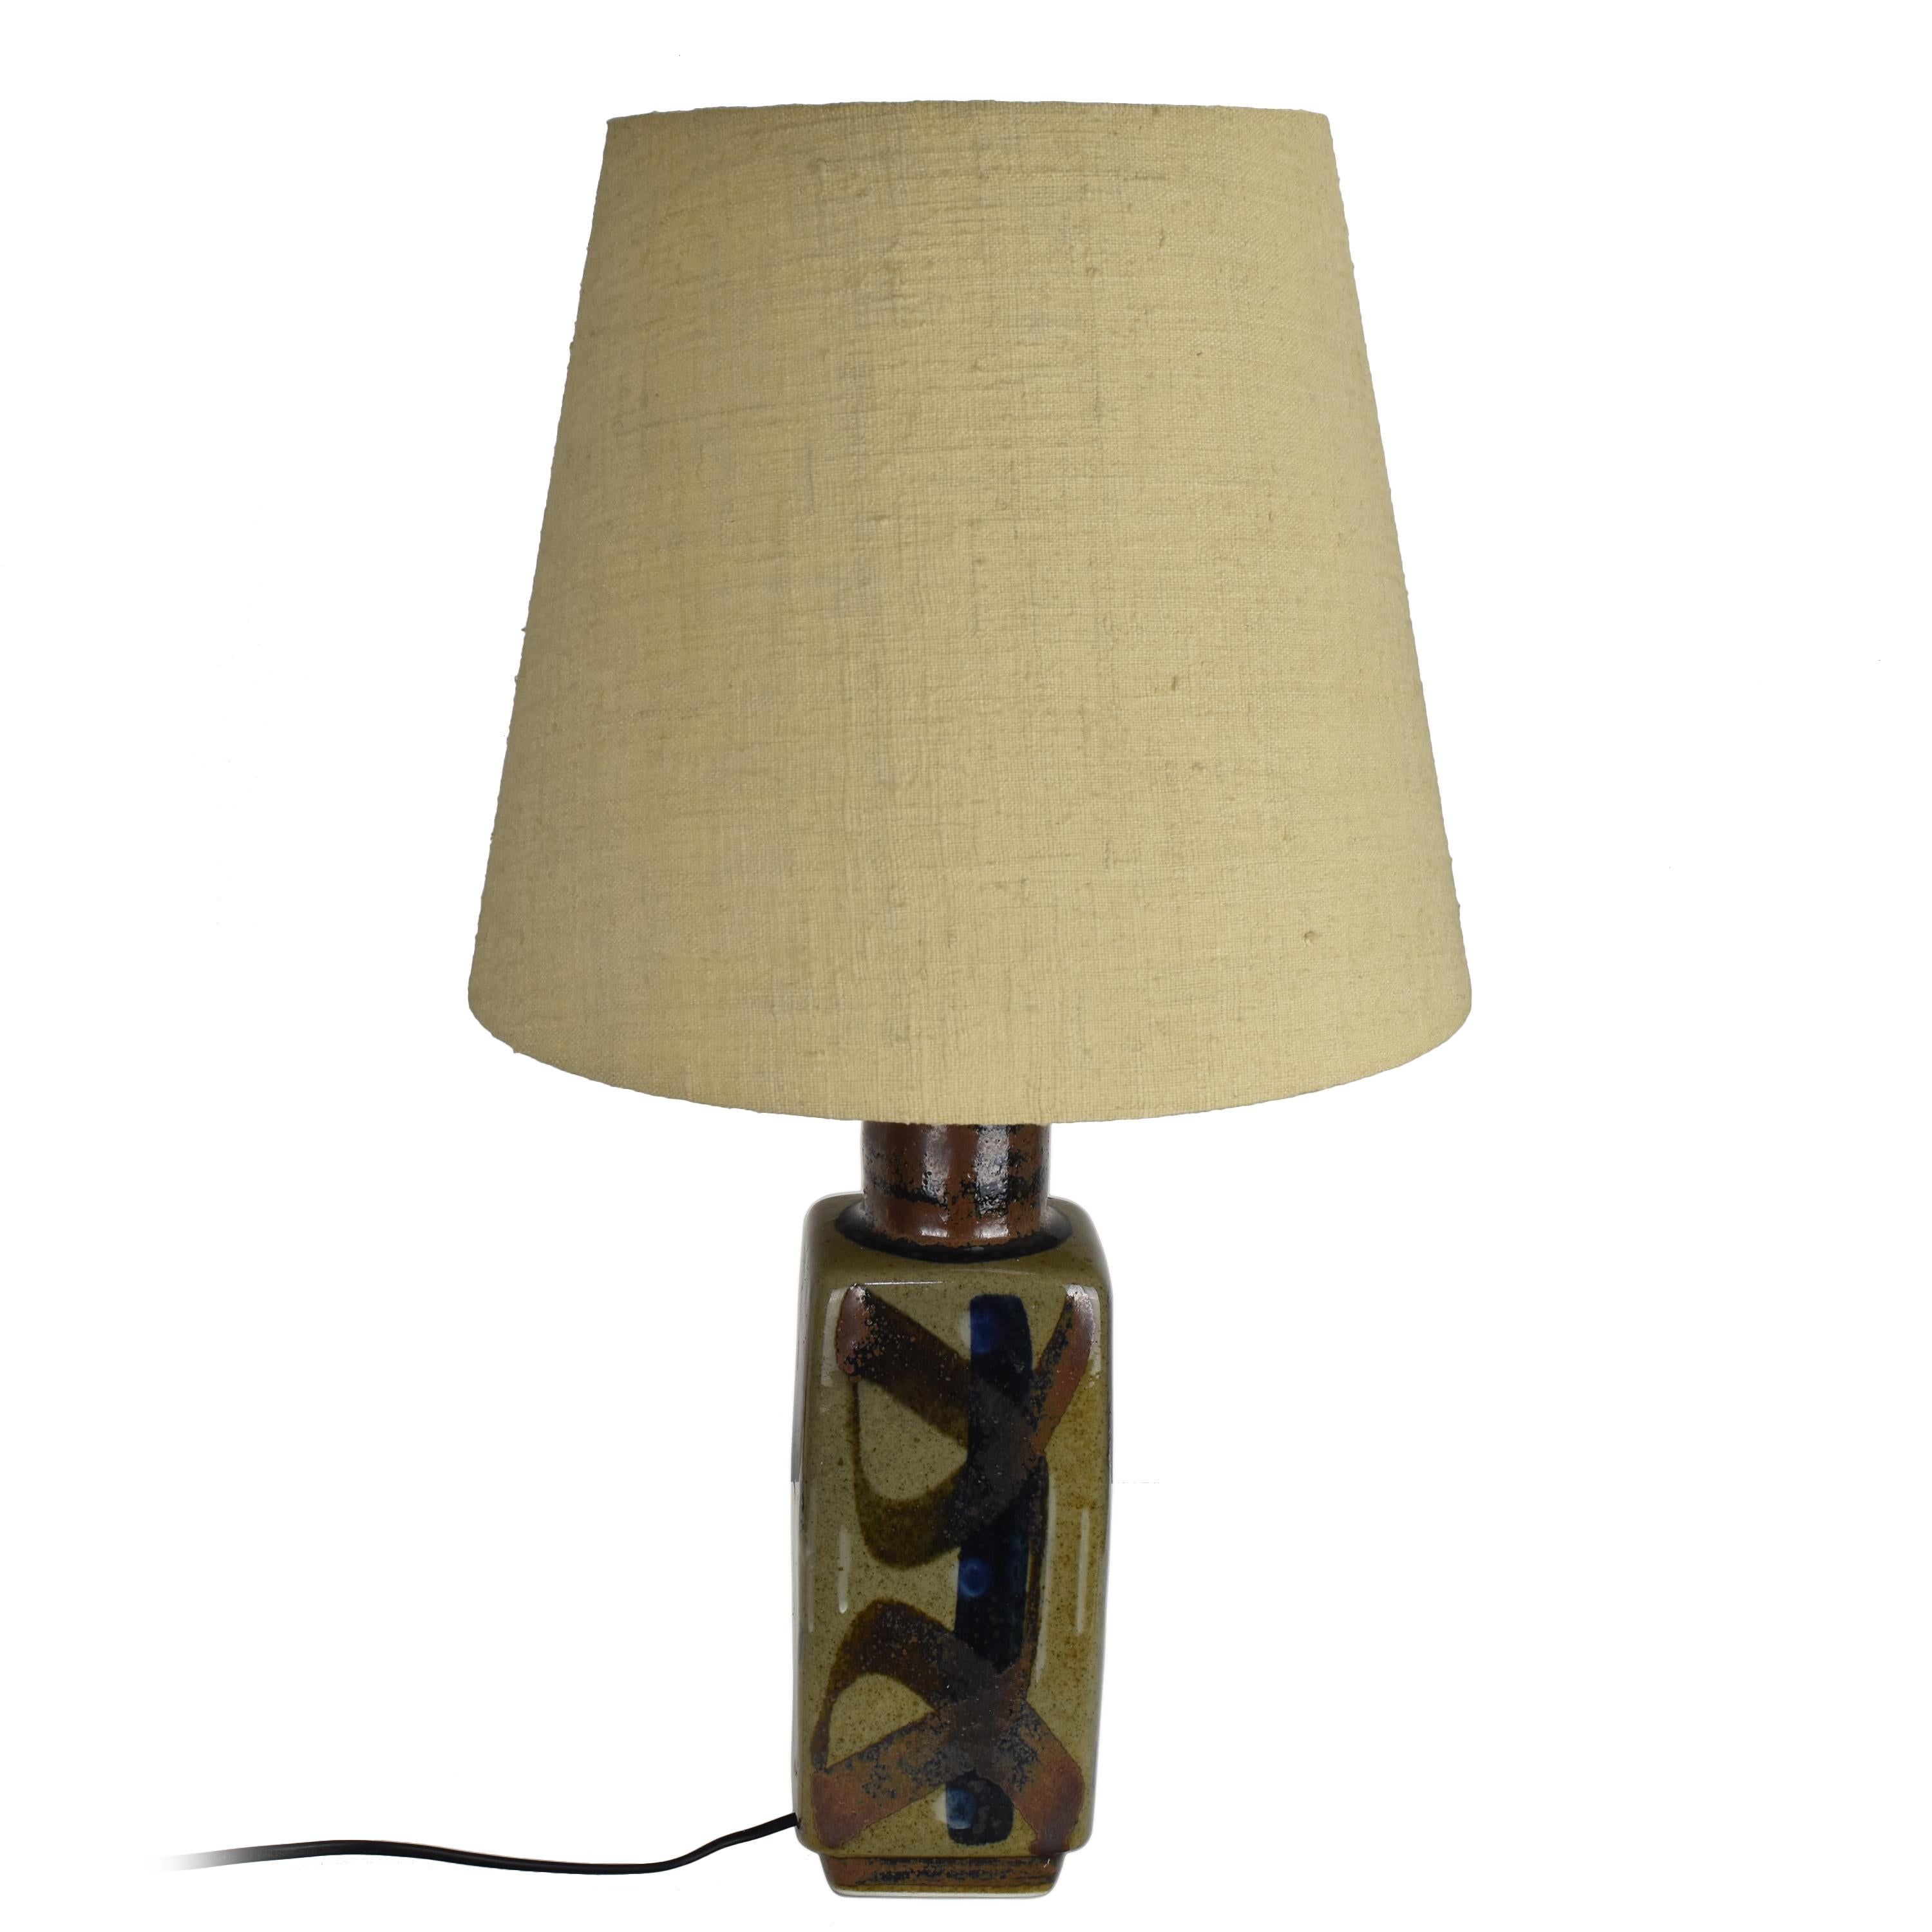 Carl Harry Stalhane Hand-Painted Ceramic Table Lamp, Rörstrand, 1960s In Good Condition For Sale In Bad Säckingen, DE